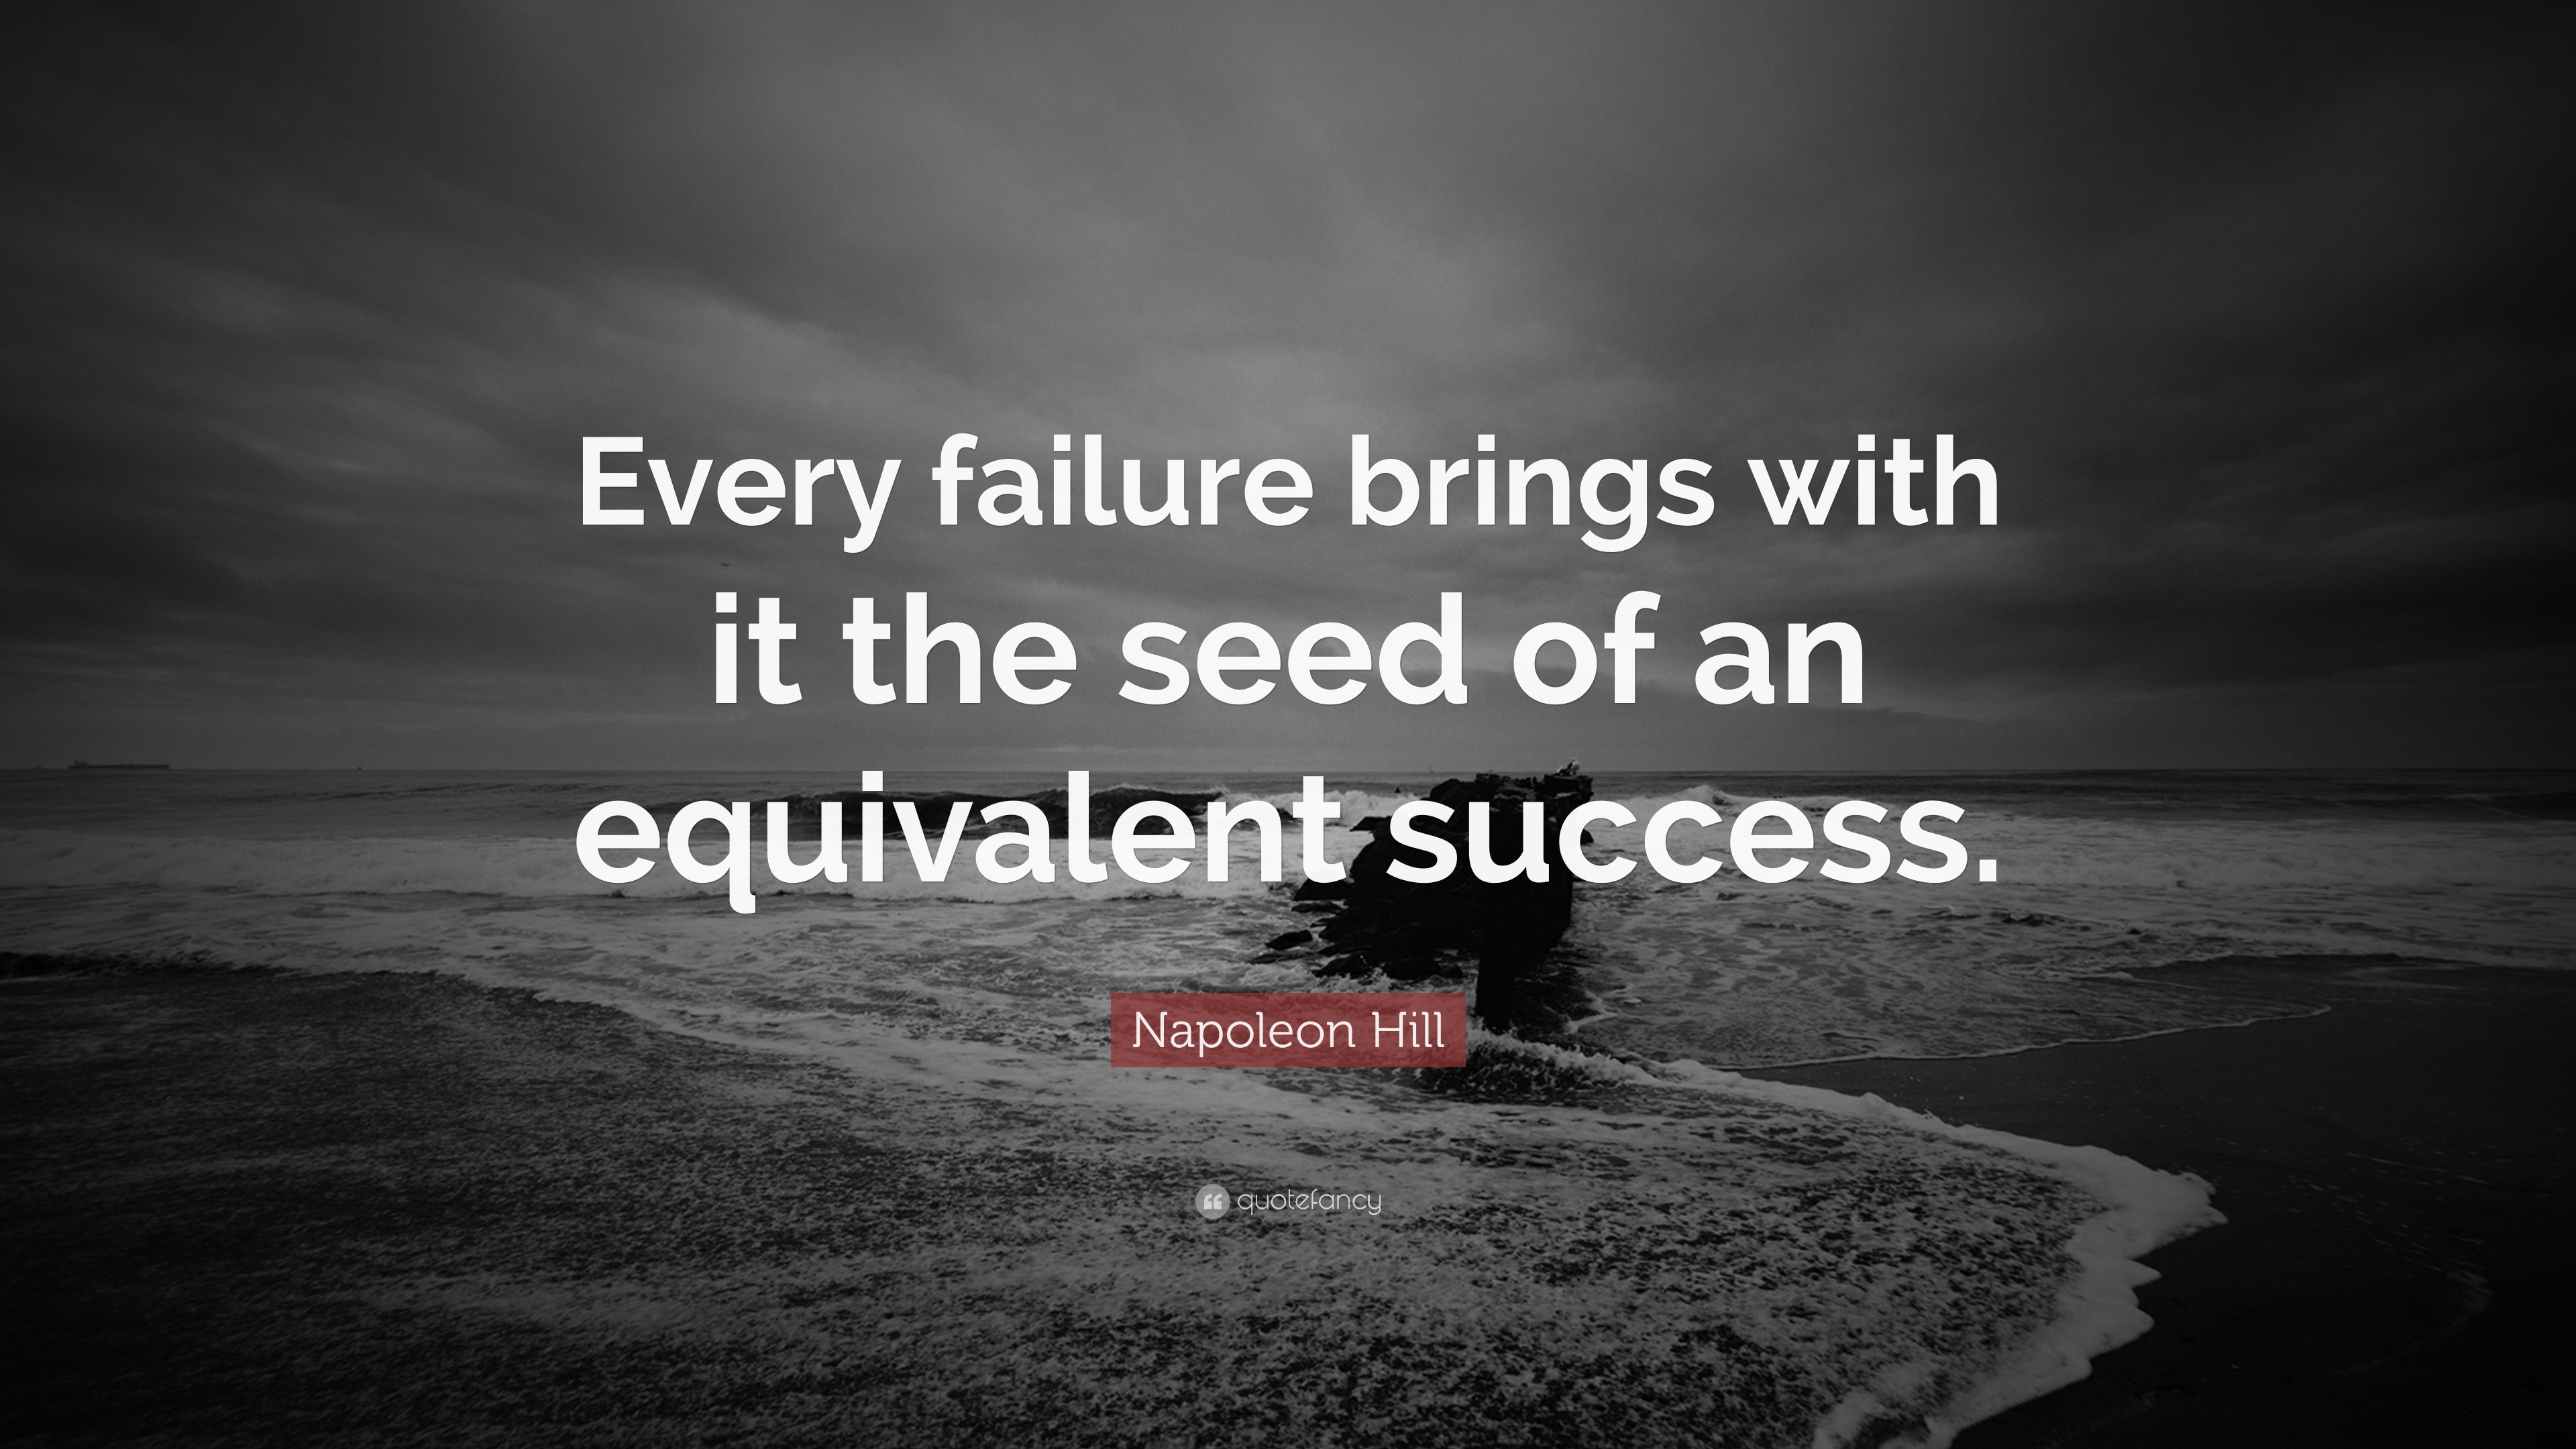 Napoleon Hill Quote: “Every failure brings with it the seed of an ...